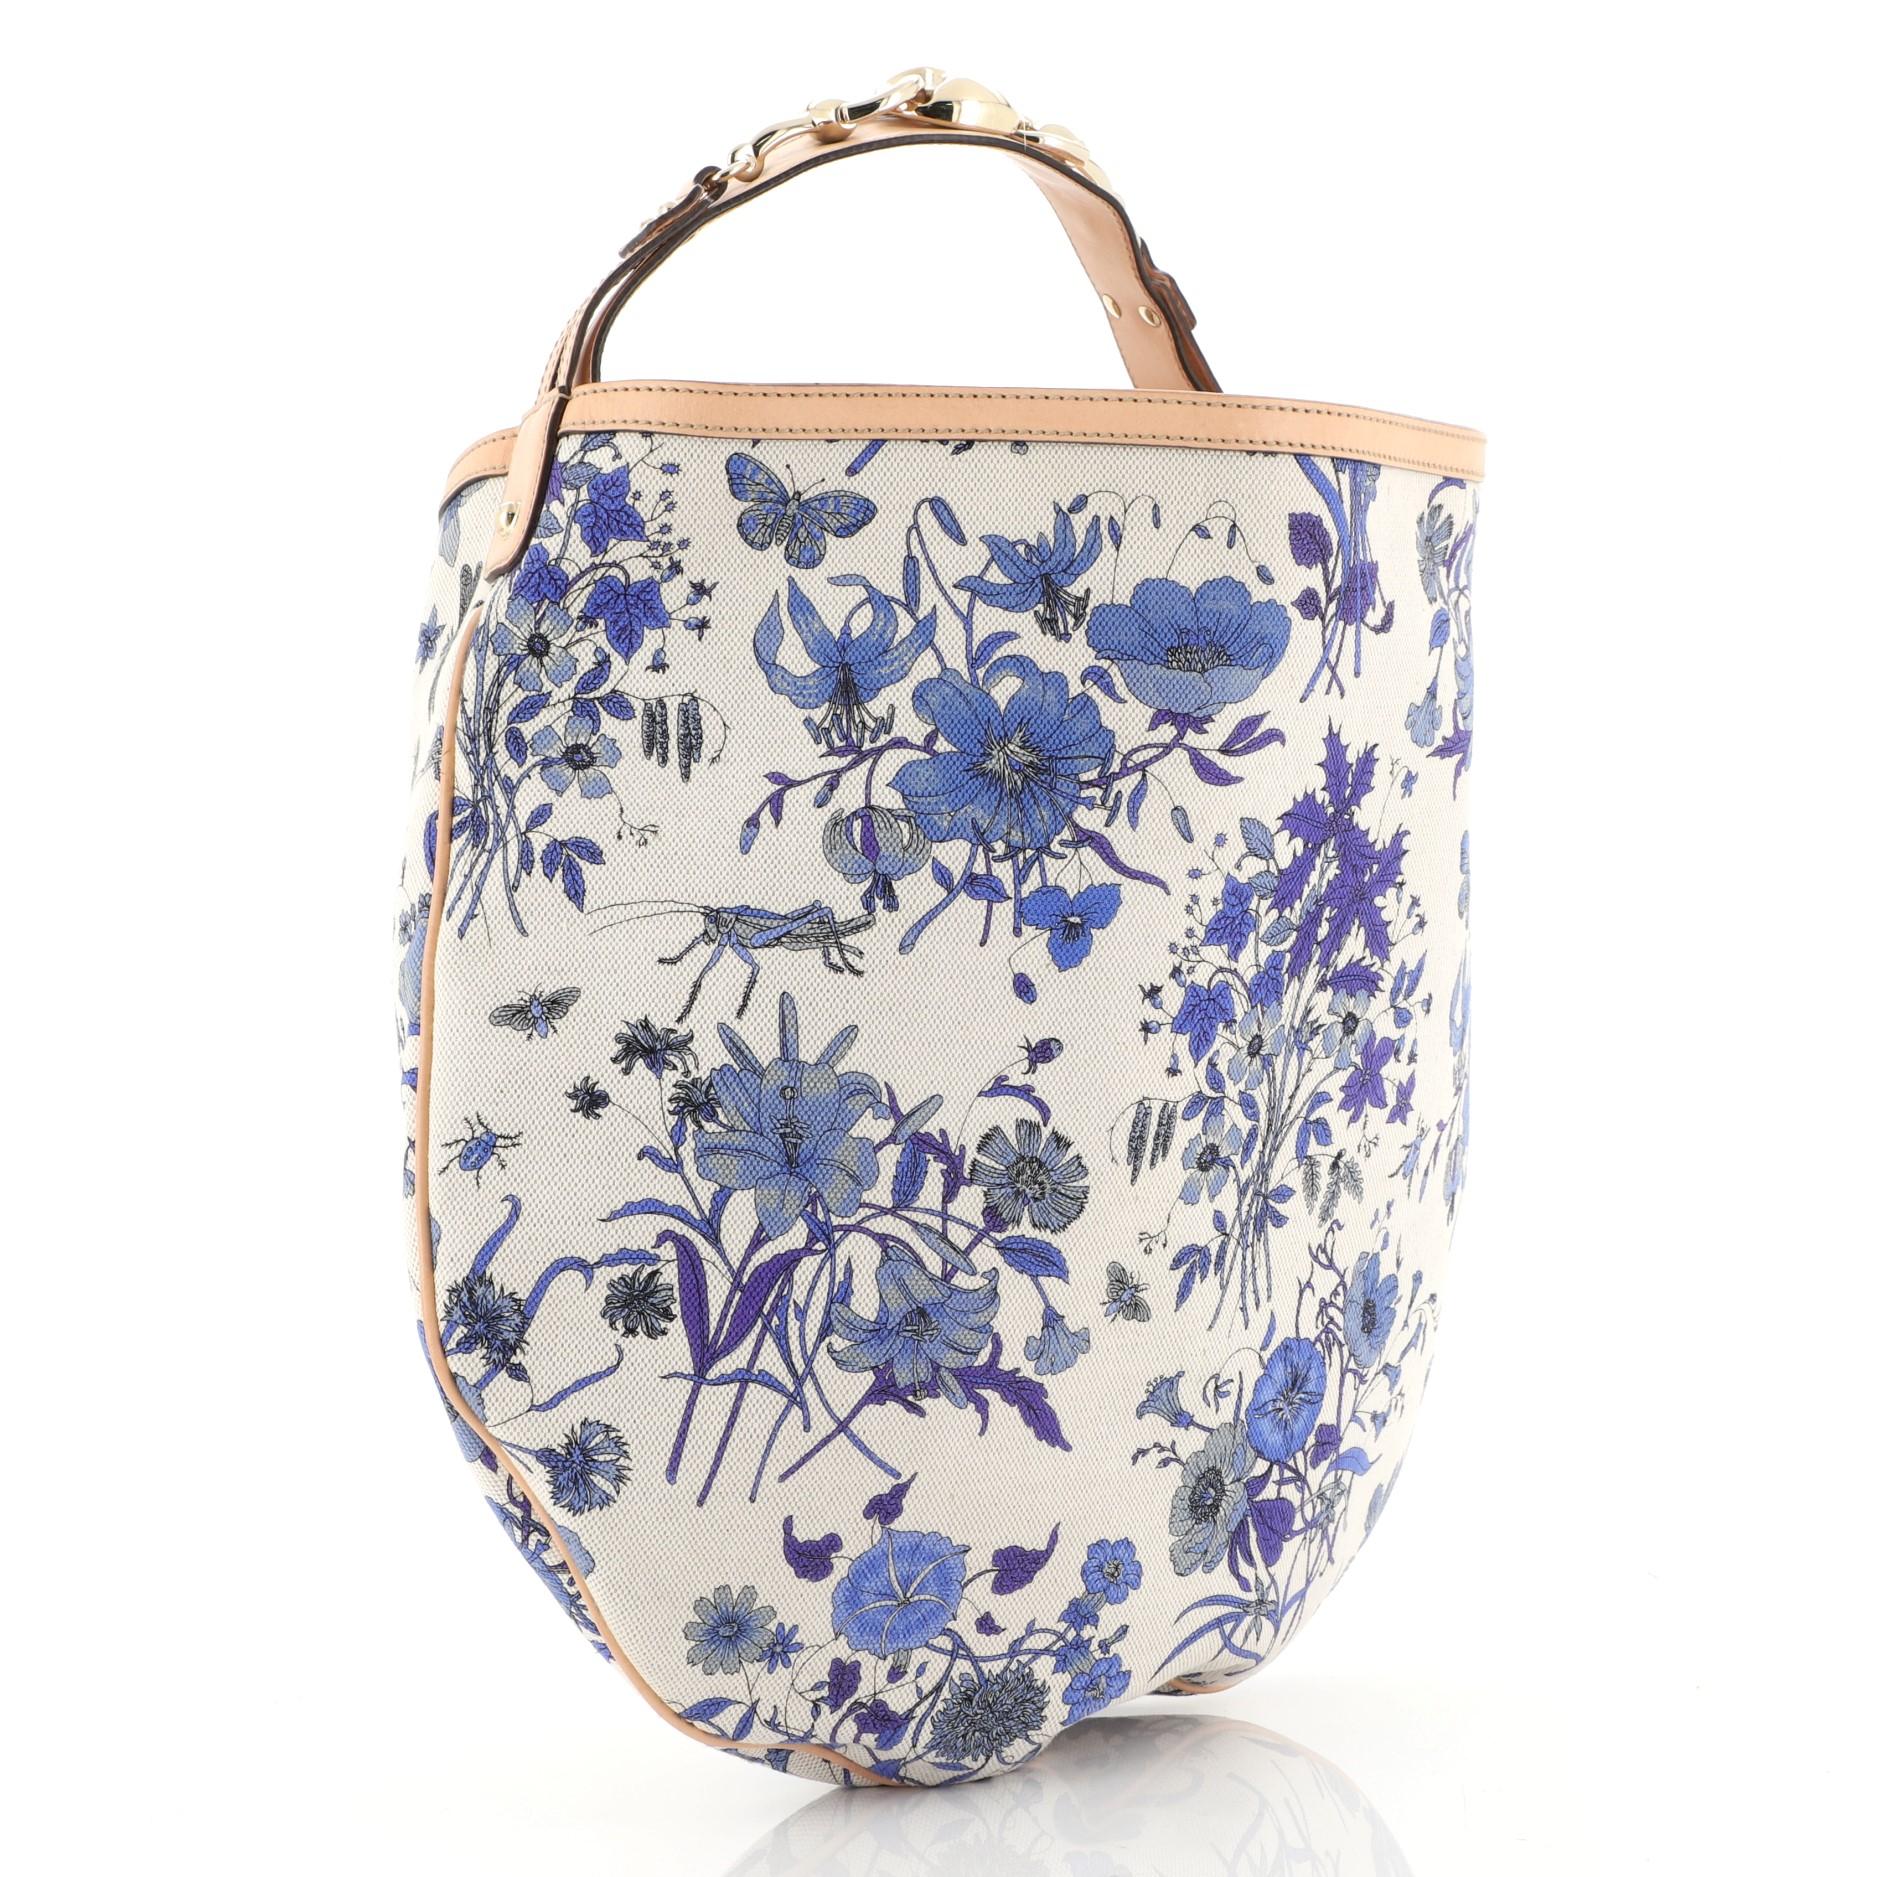 This Gucci Wave Hobo Flora Canvas, crafted from a blue floral printed canvas, features flat leather shoulder strap with horsebit details, leather trim, and gold-tone hardware. It opens to a neutral fabric interior with side zip and slip pockets.